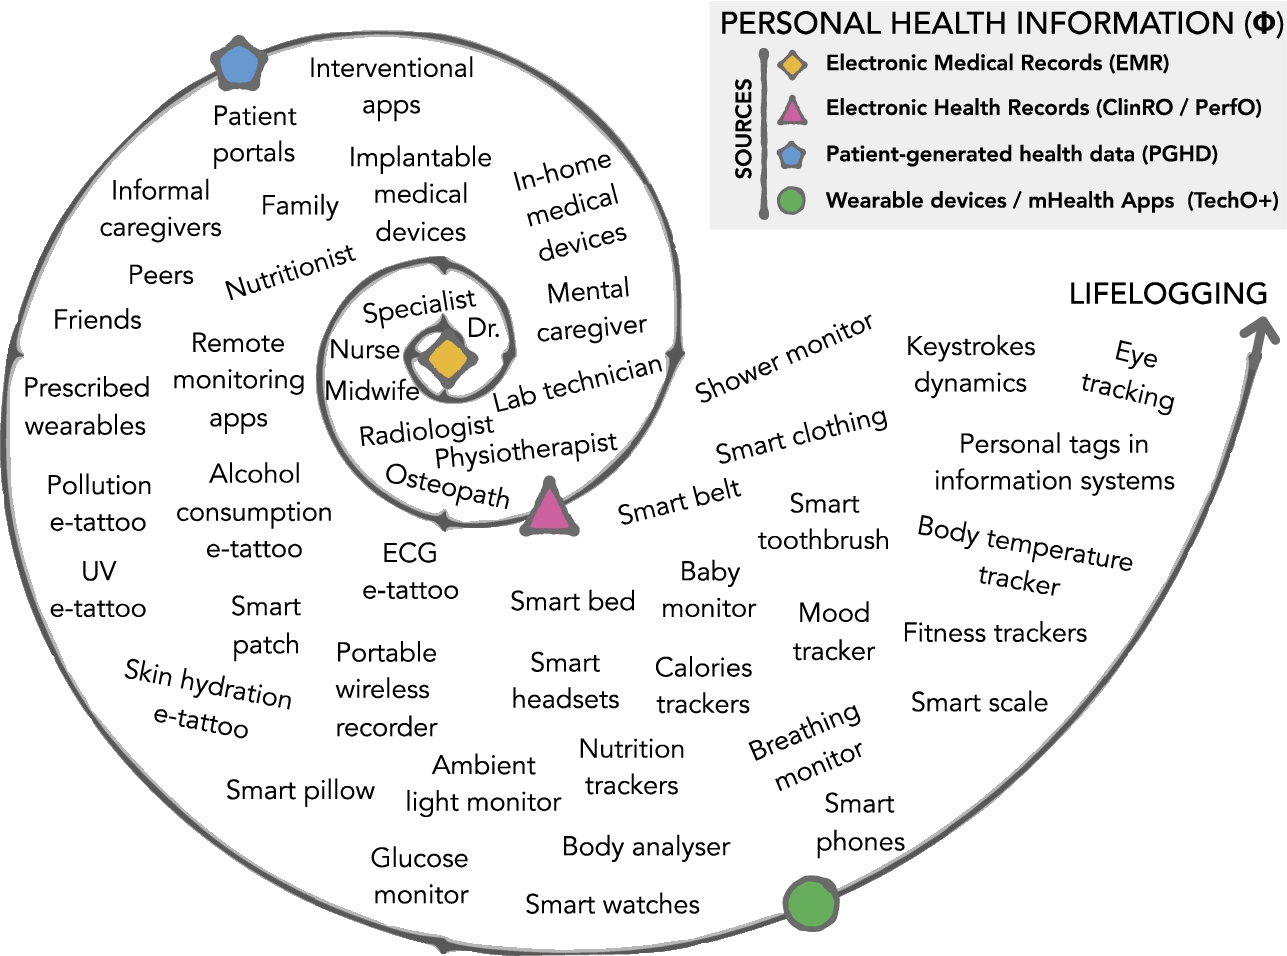 The main sources for personal health information are electronic medical records, electronic health records, patient-generated health data, wearable devices and mHealth apps. They contribute to fill the ever-growing volume of phi dimensional data about an individual.